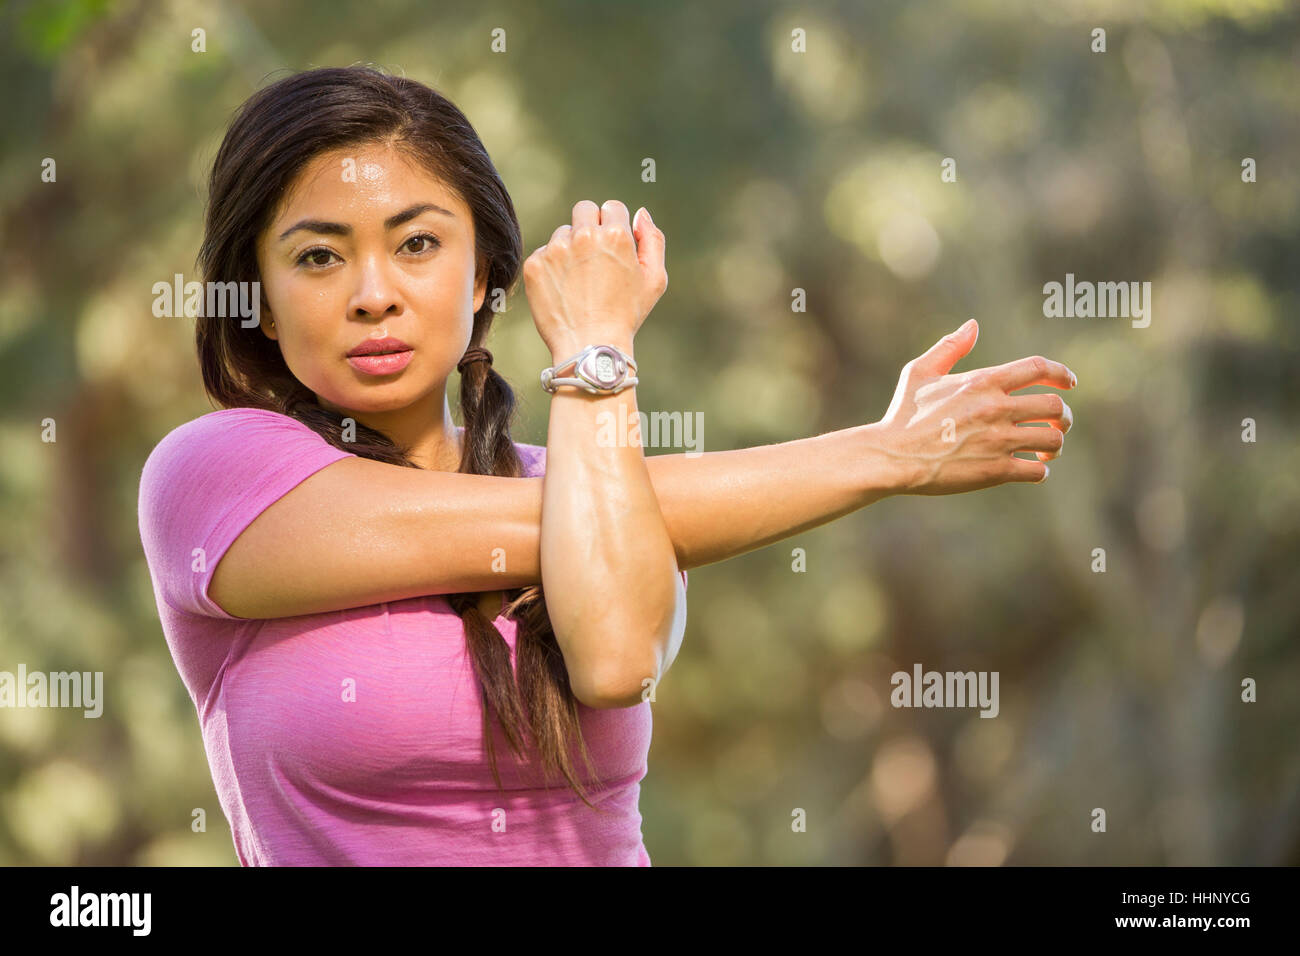 Portrait of Asian woman stretching arms Banque D'Images